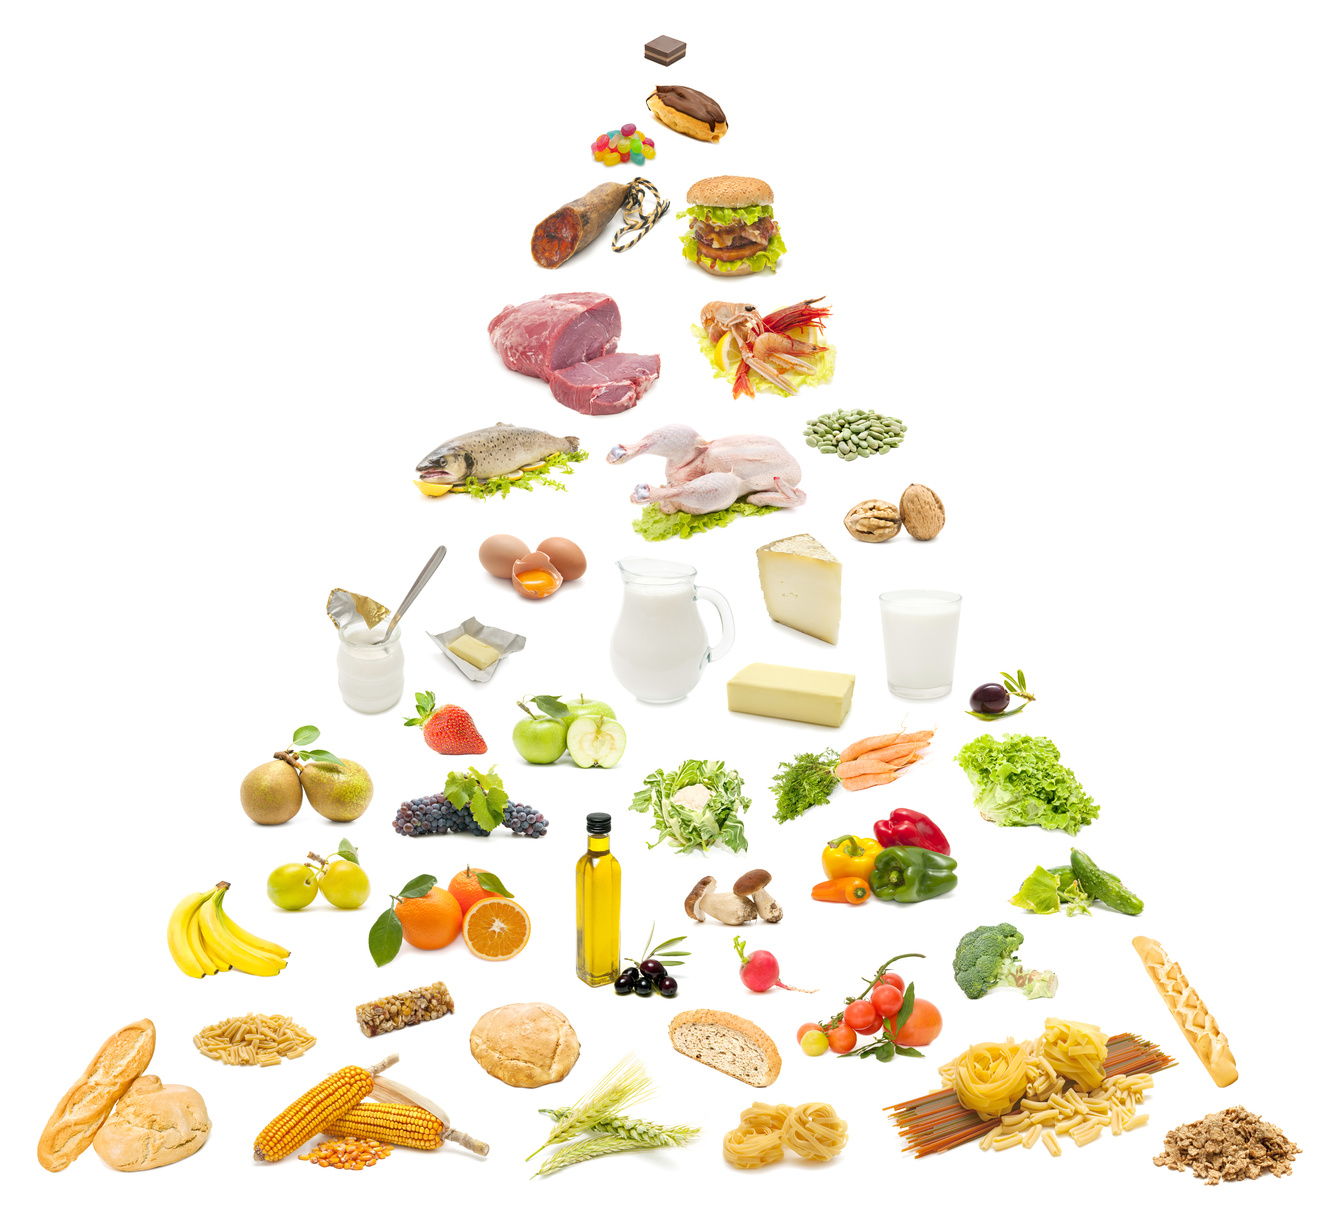 food pyramid on white background